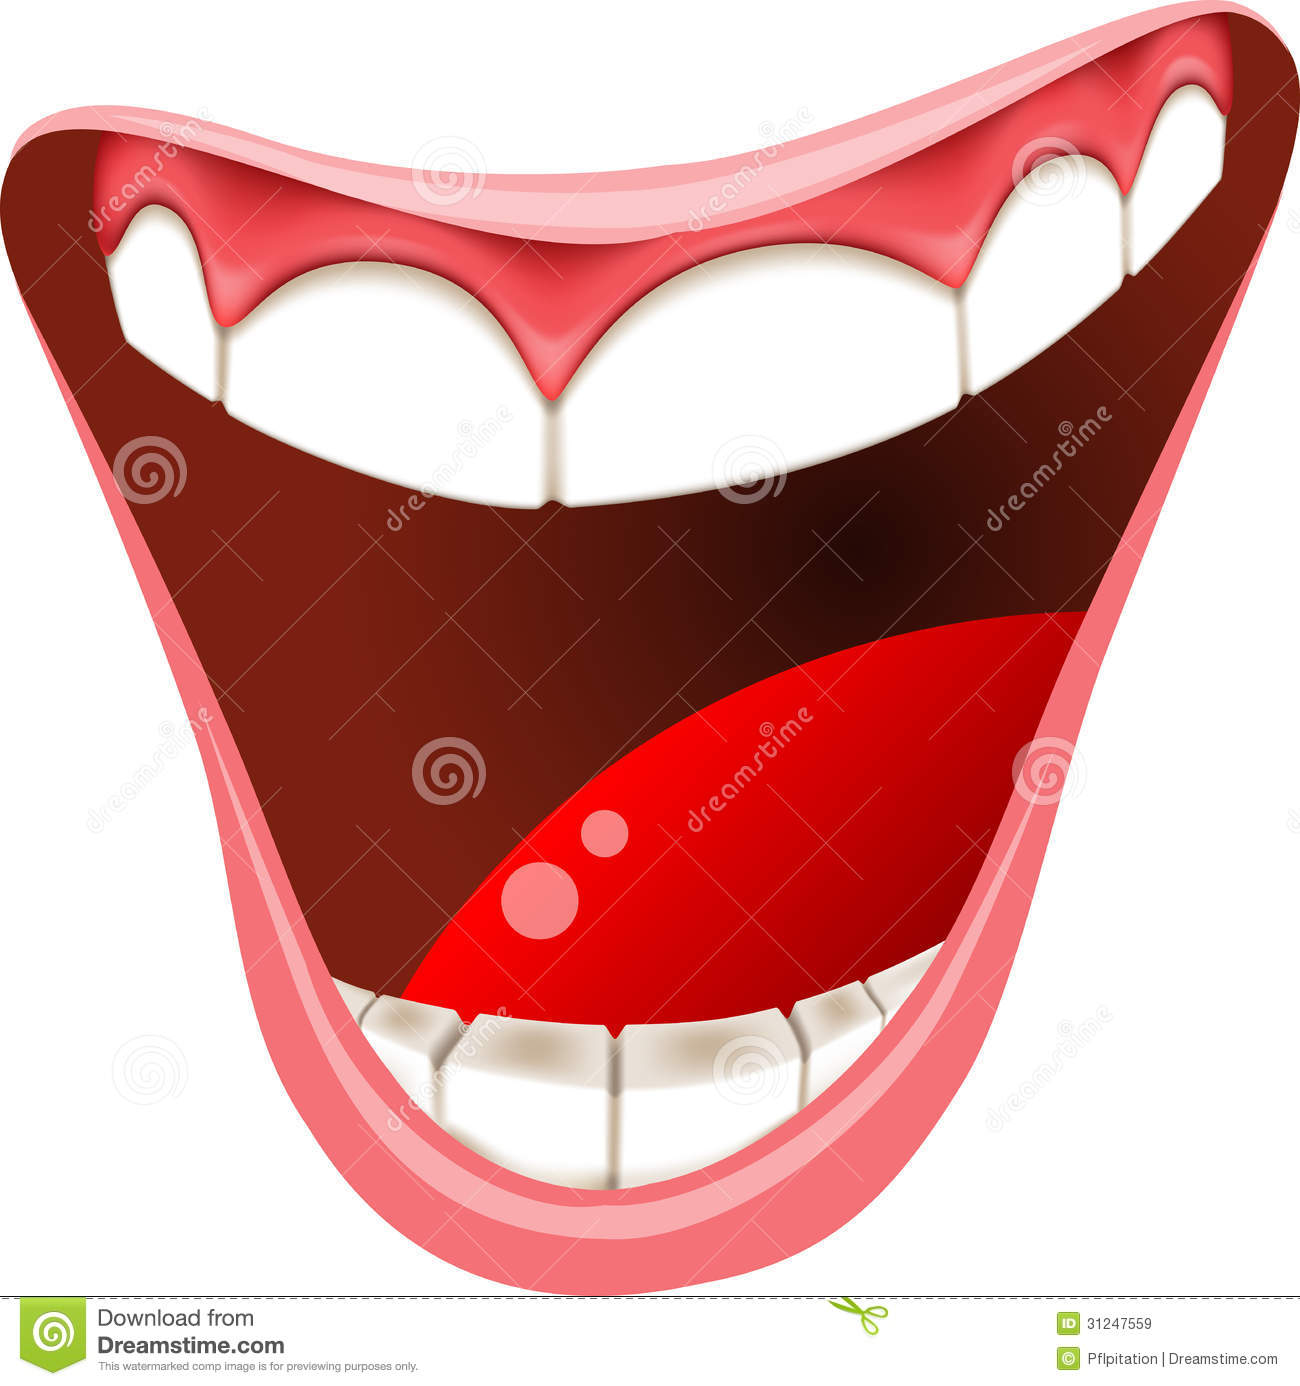 Smiling Mouth Healthy Teeth Illustration Of Mouth With White Healthy